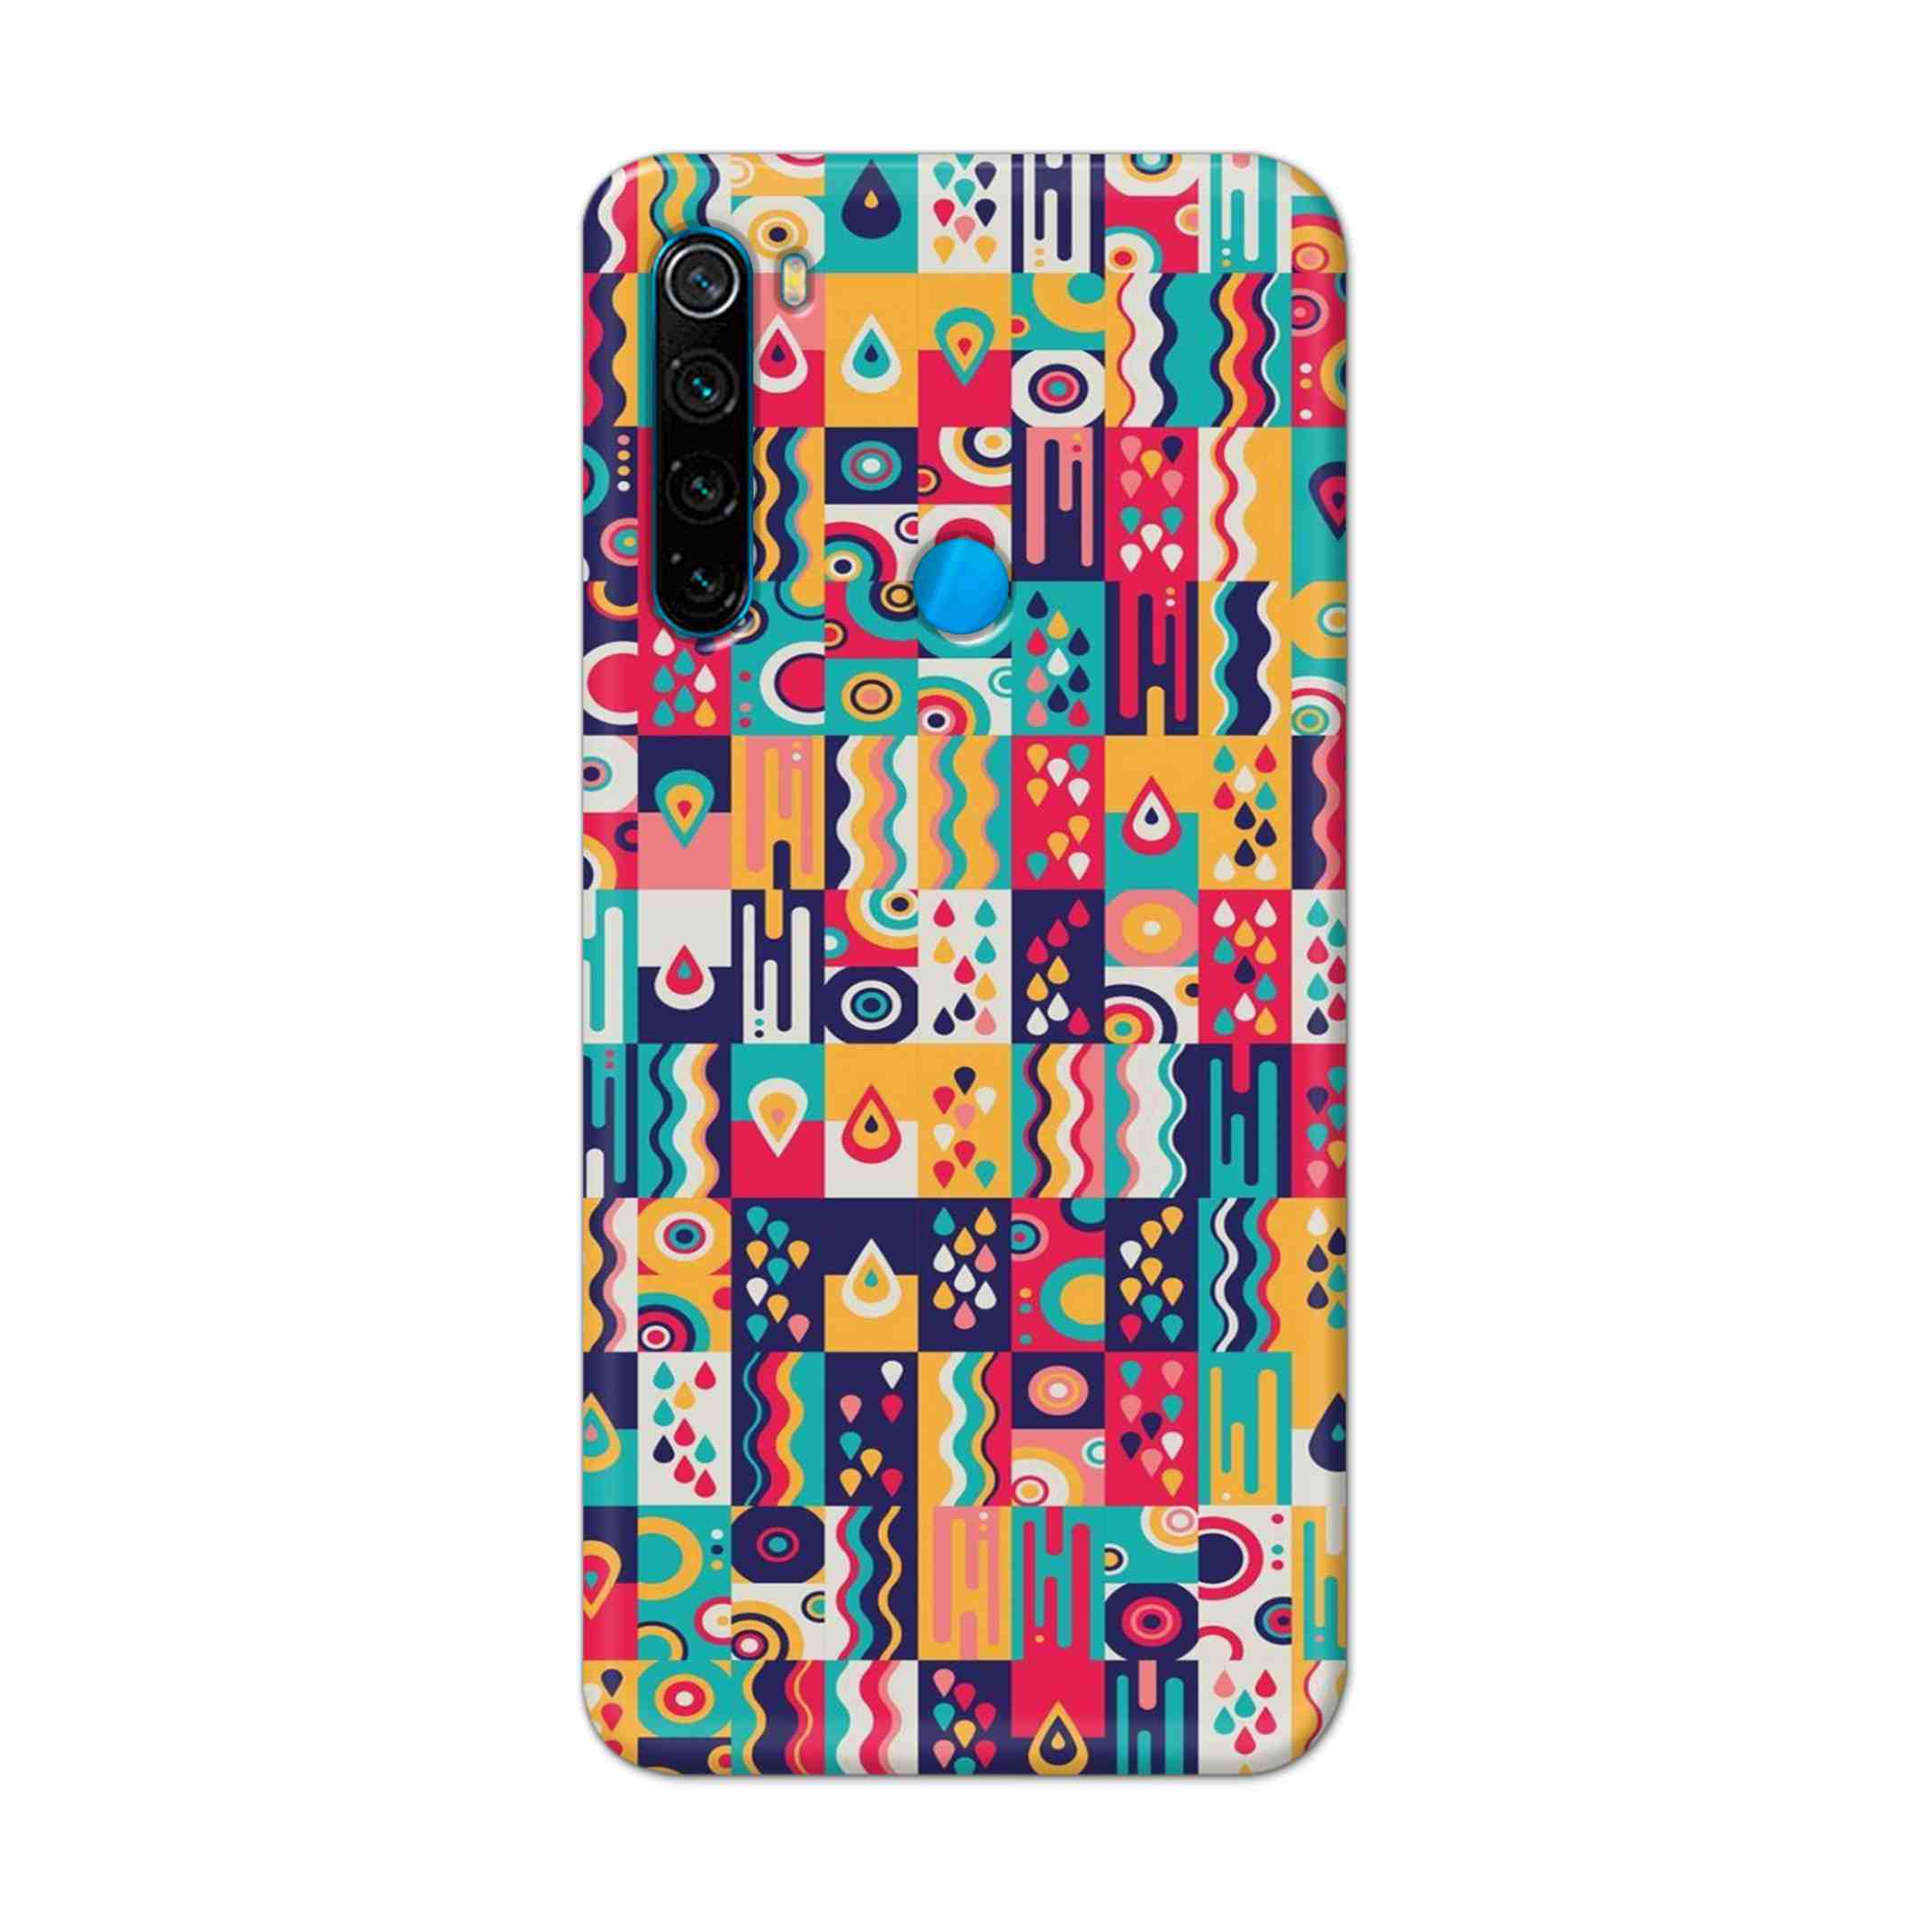 Buy Art Hard Back Mobile Phone Case Cover For Xiaomi Redmi Note 8 Online